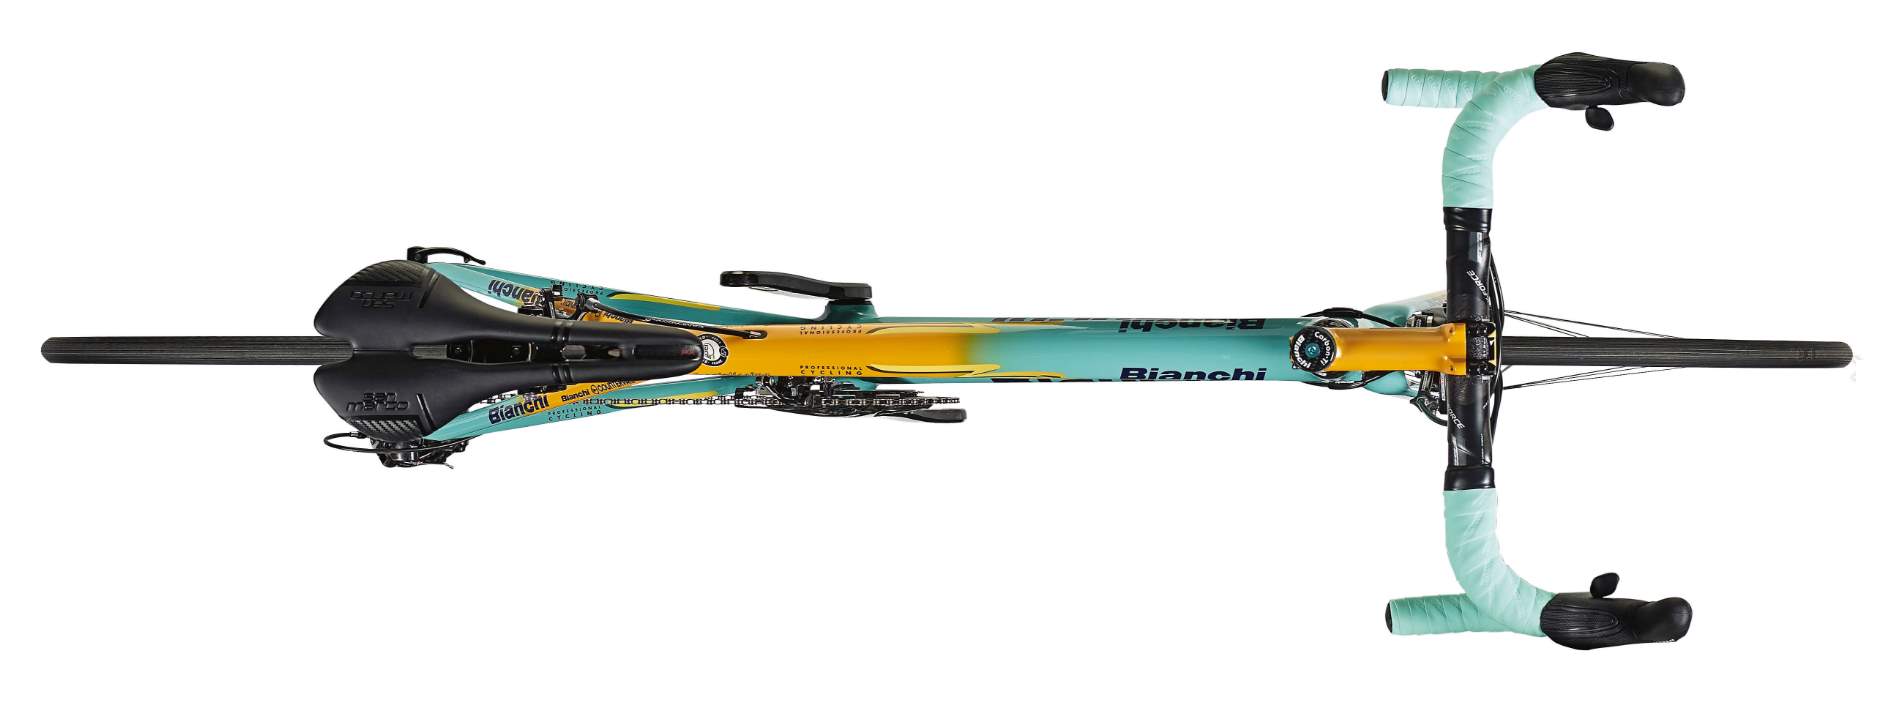 Bianchi Specialissima 2018 Pantani Edition - from up